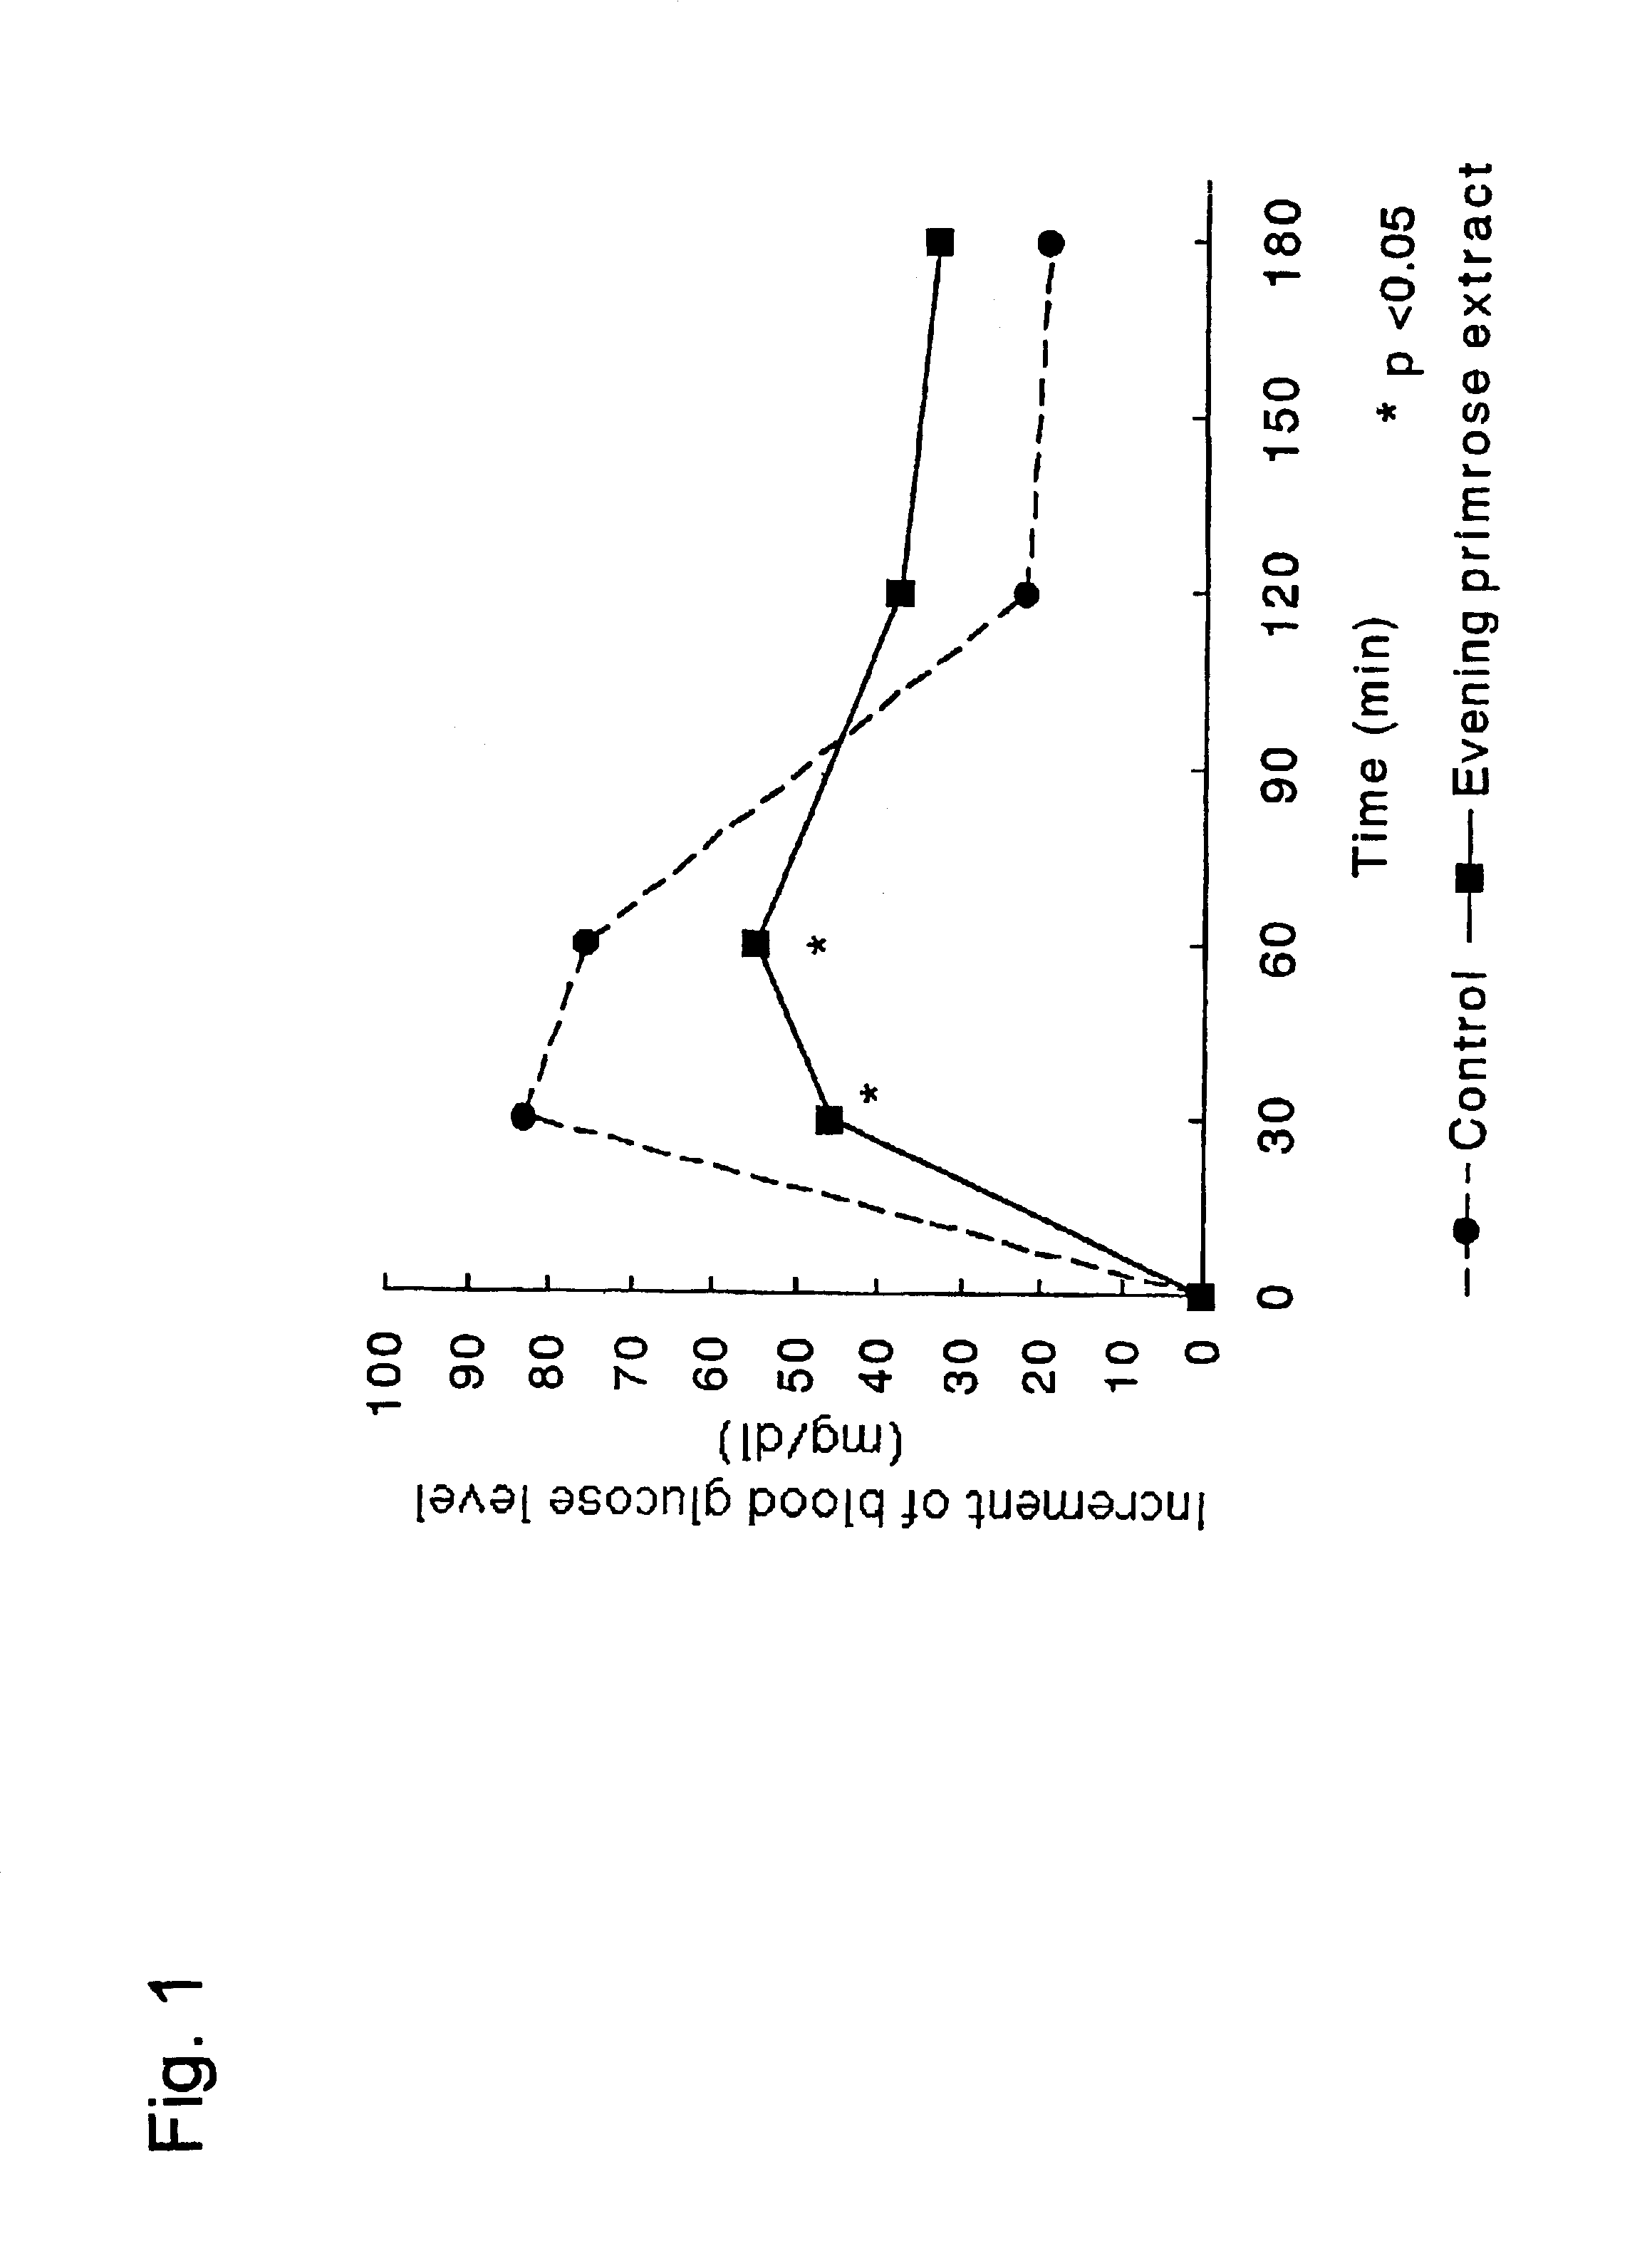 Carbohydrate absorption inhibitor and method for manufacturing the same